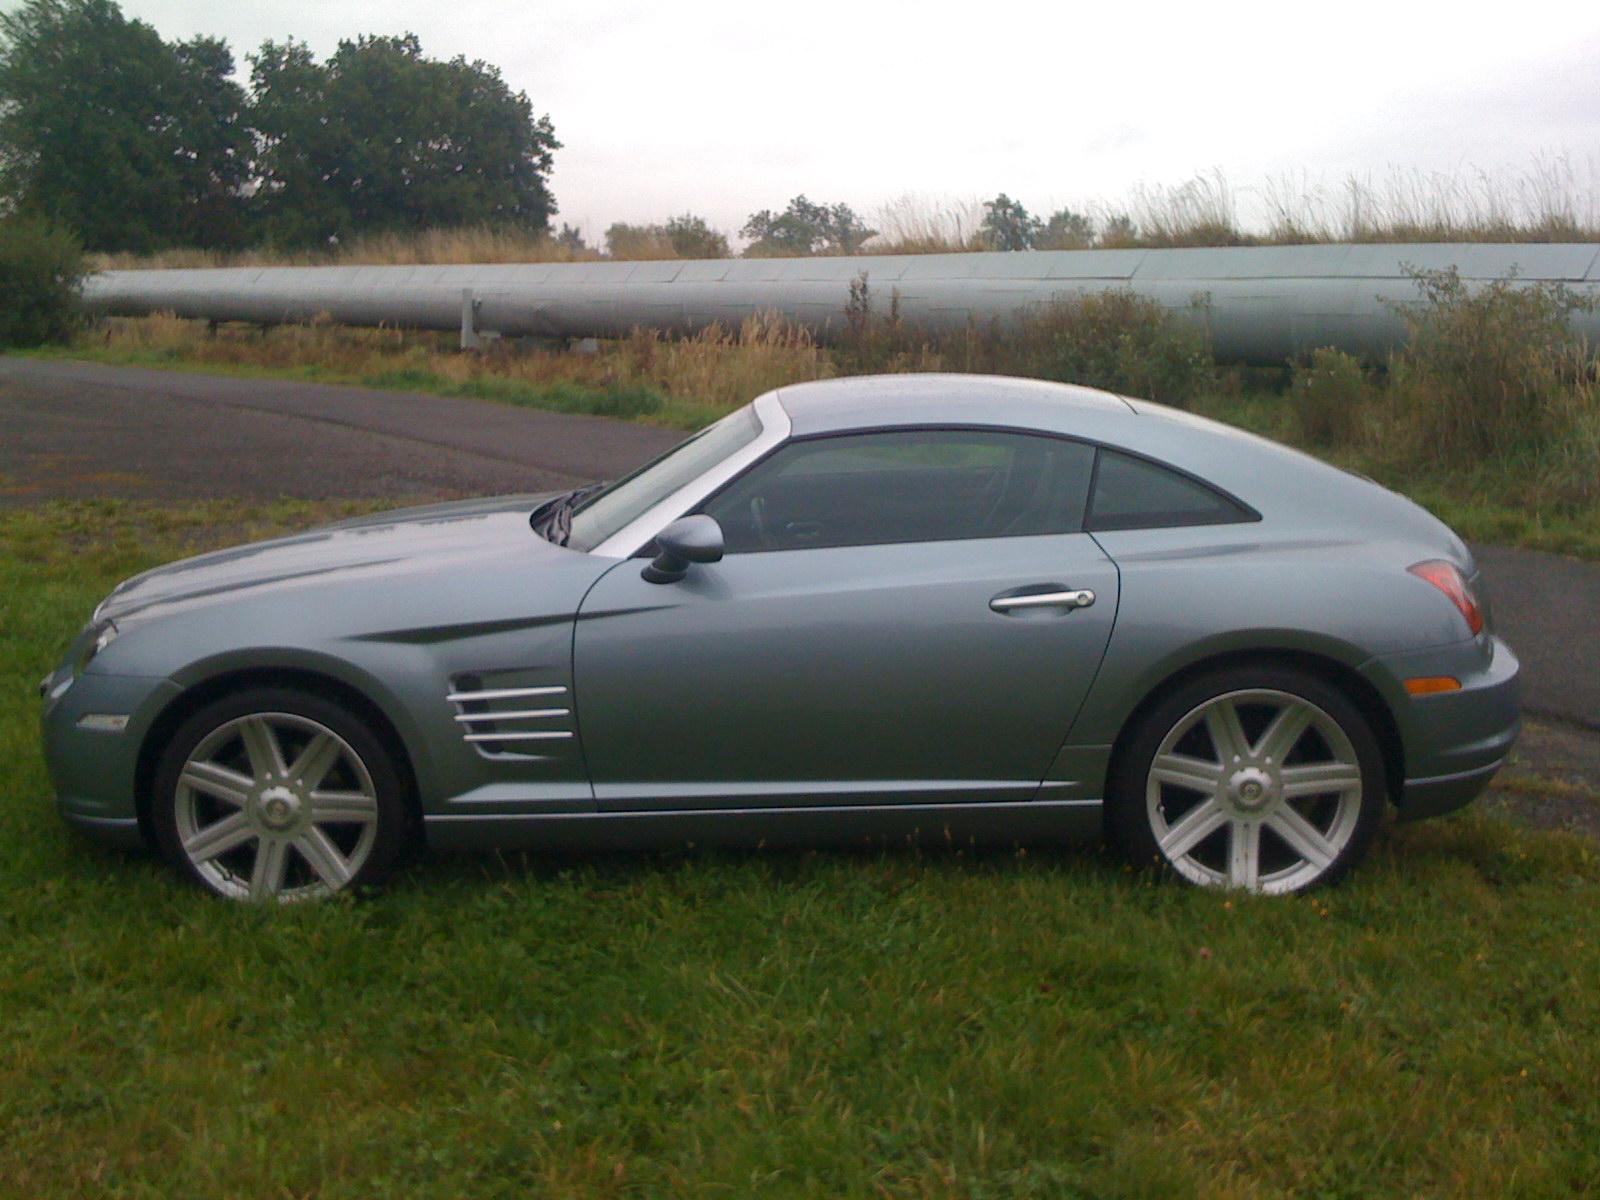 Chrysler crossfire owners club #1